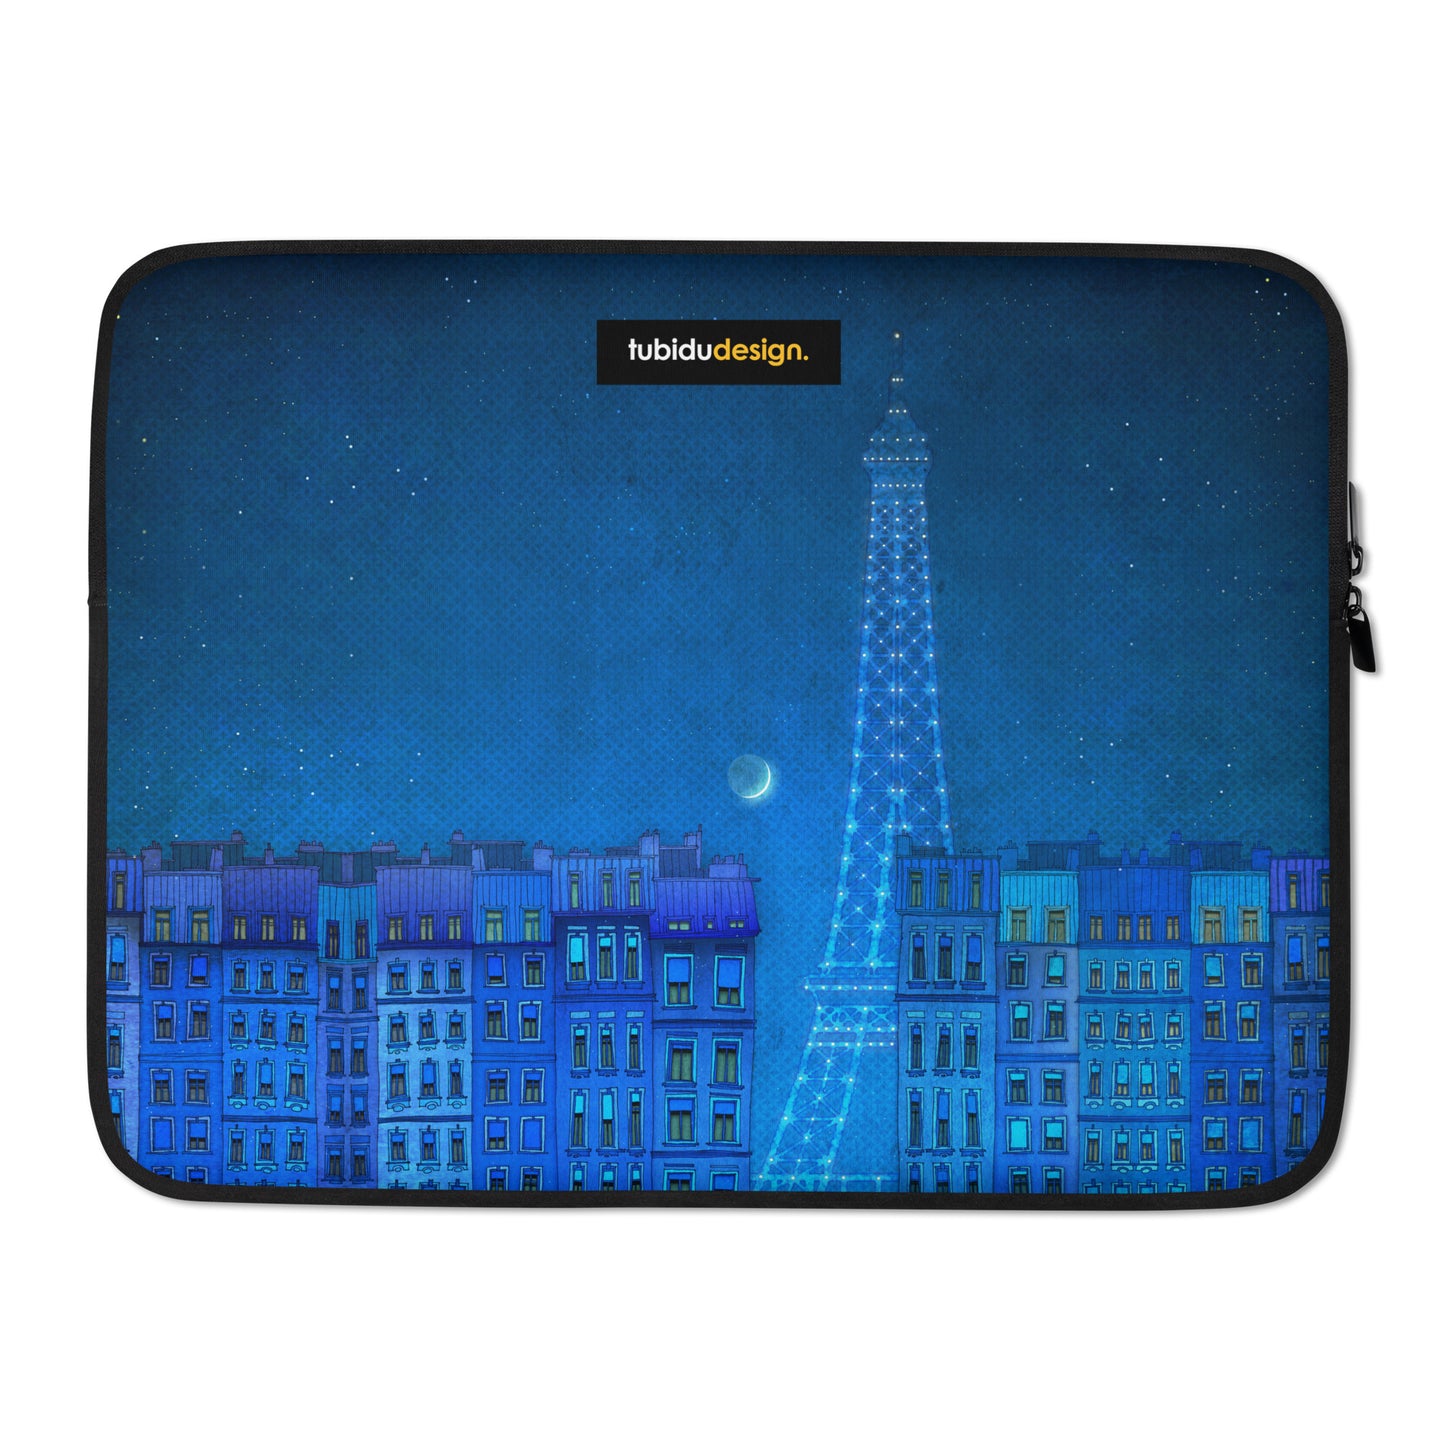 The lights of the Eiffel tower - Illustrated Laptop Sleeve